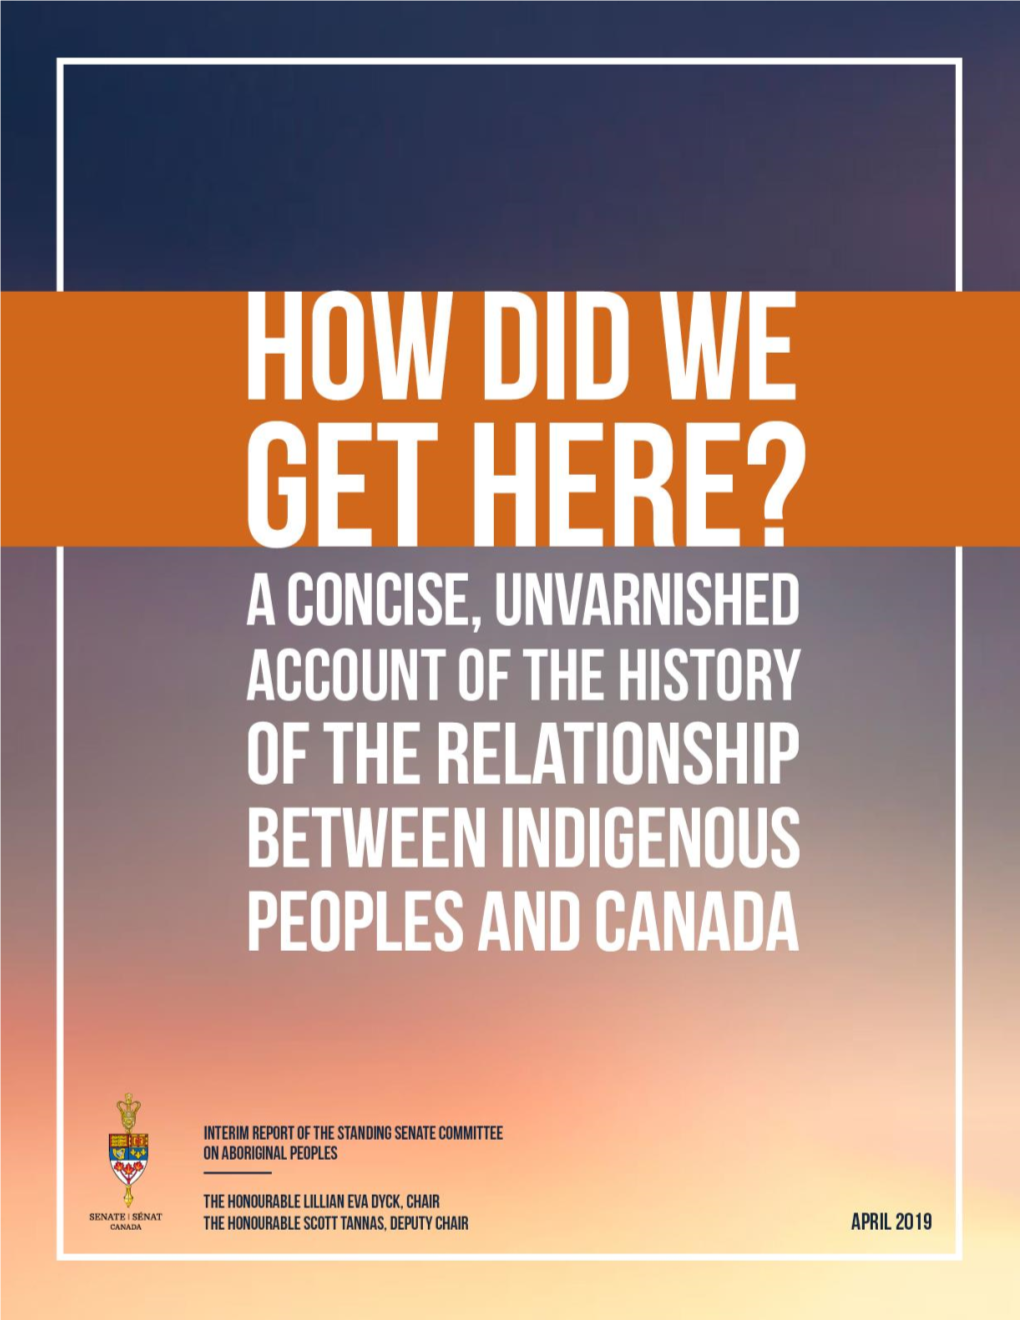 How Did We Get Here? a Concise, Unvarnished Account of the History of the Relationship Between Indigenous Peoples and Canada